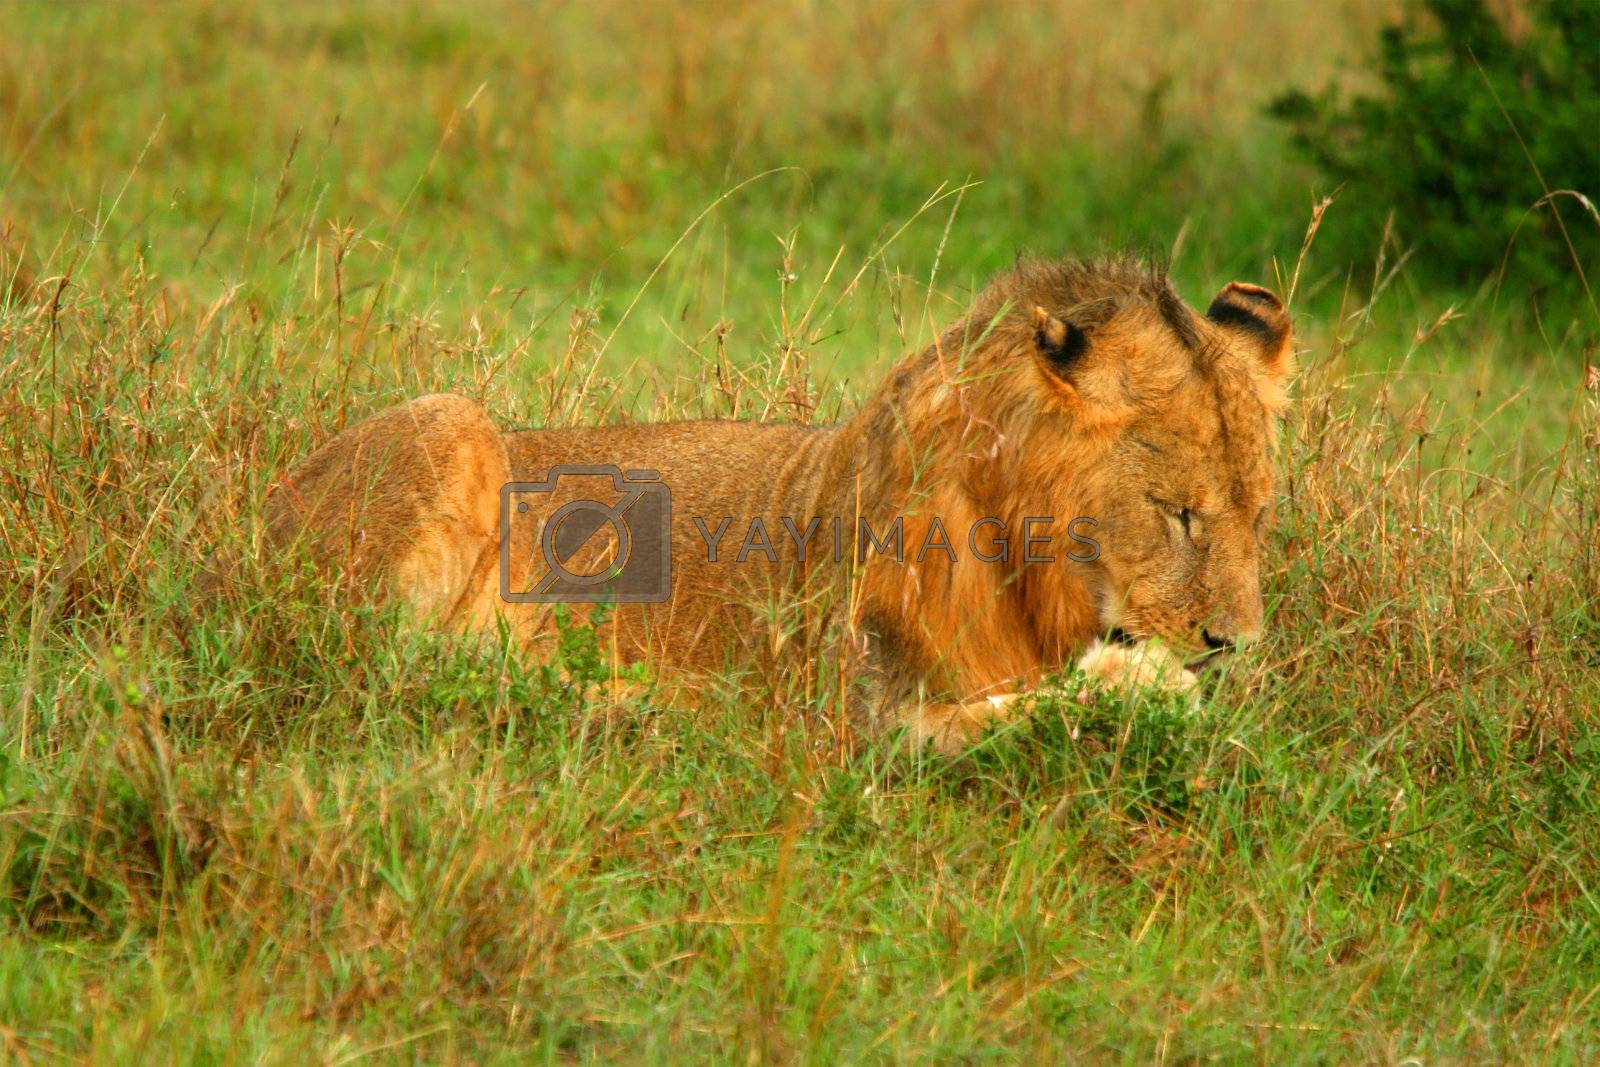 Royalty free image of Wild African Lion by Anna_Omelchenko